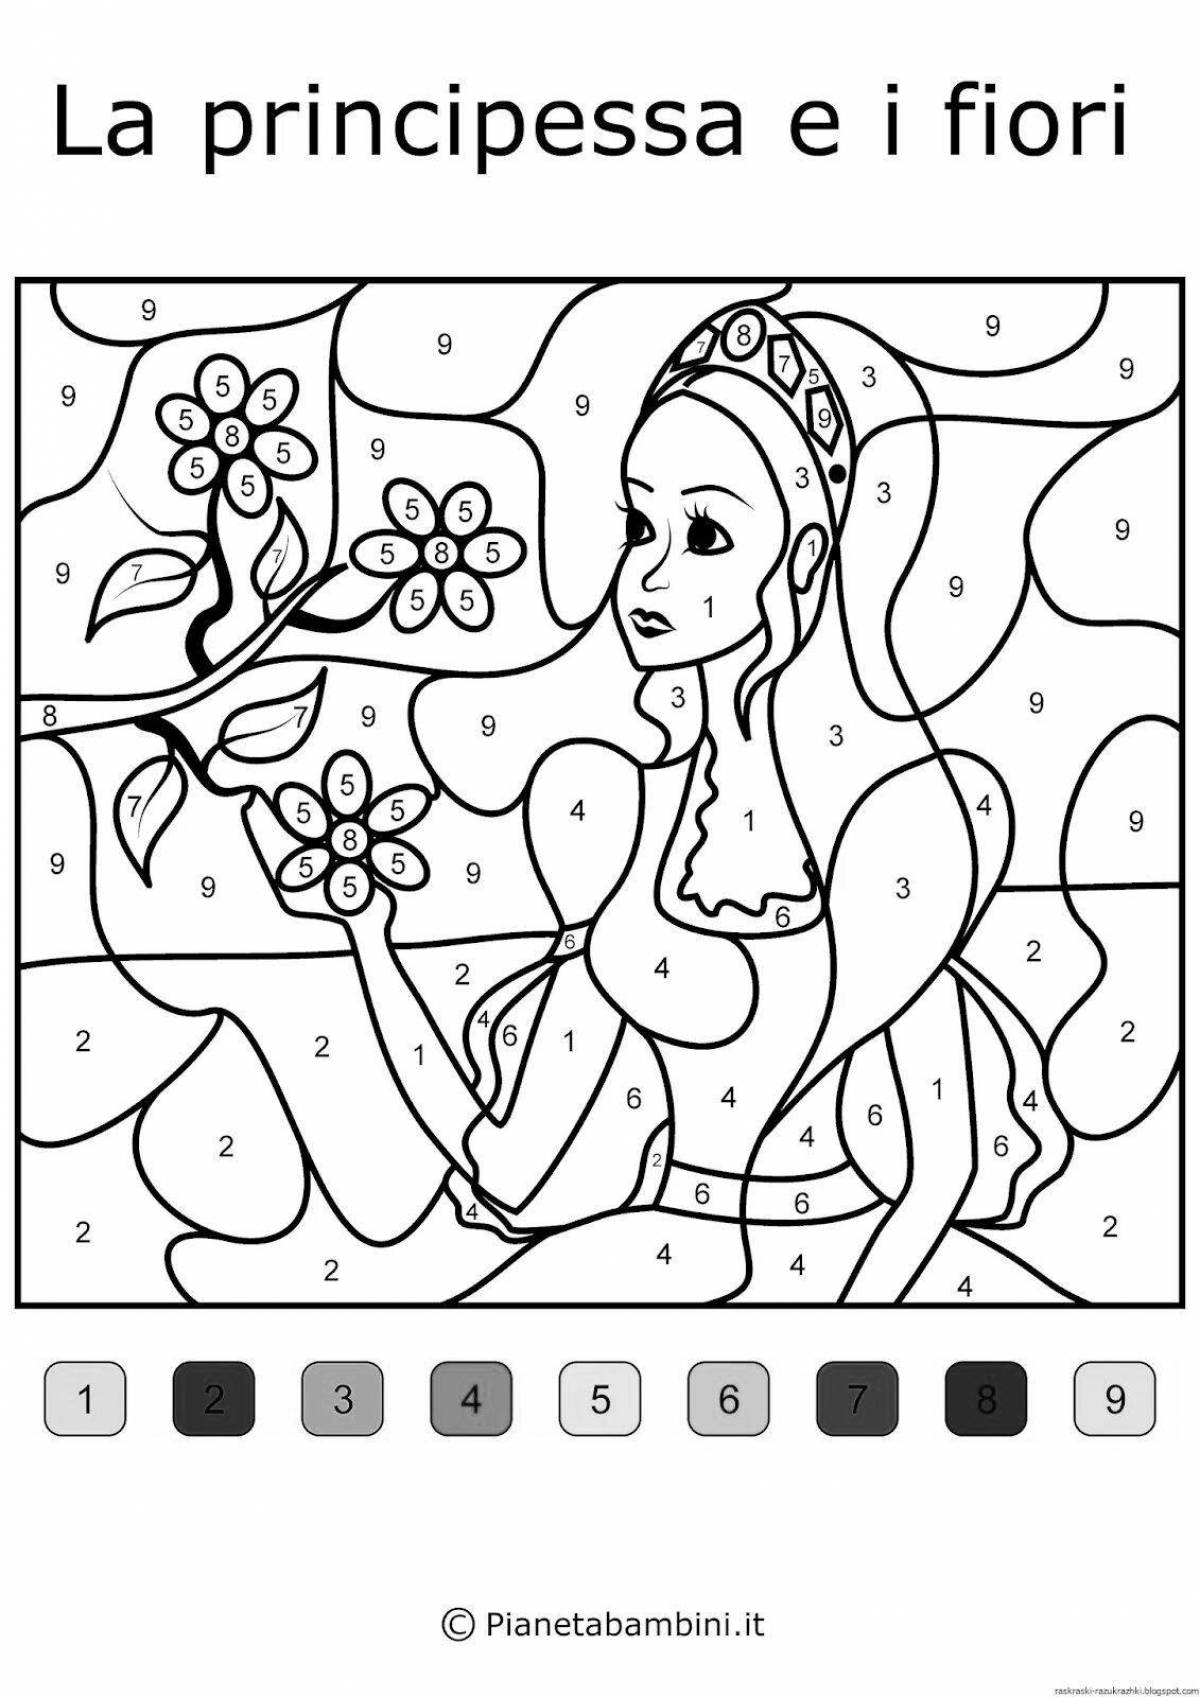 Educational coloring for girls 11 years old